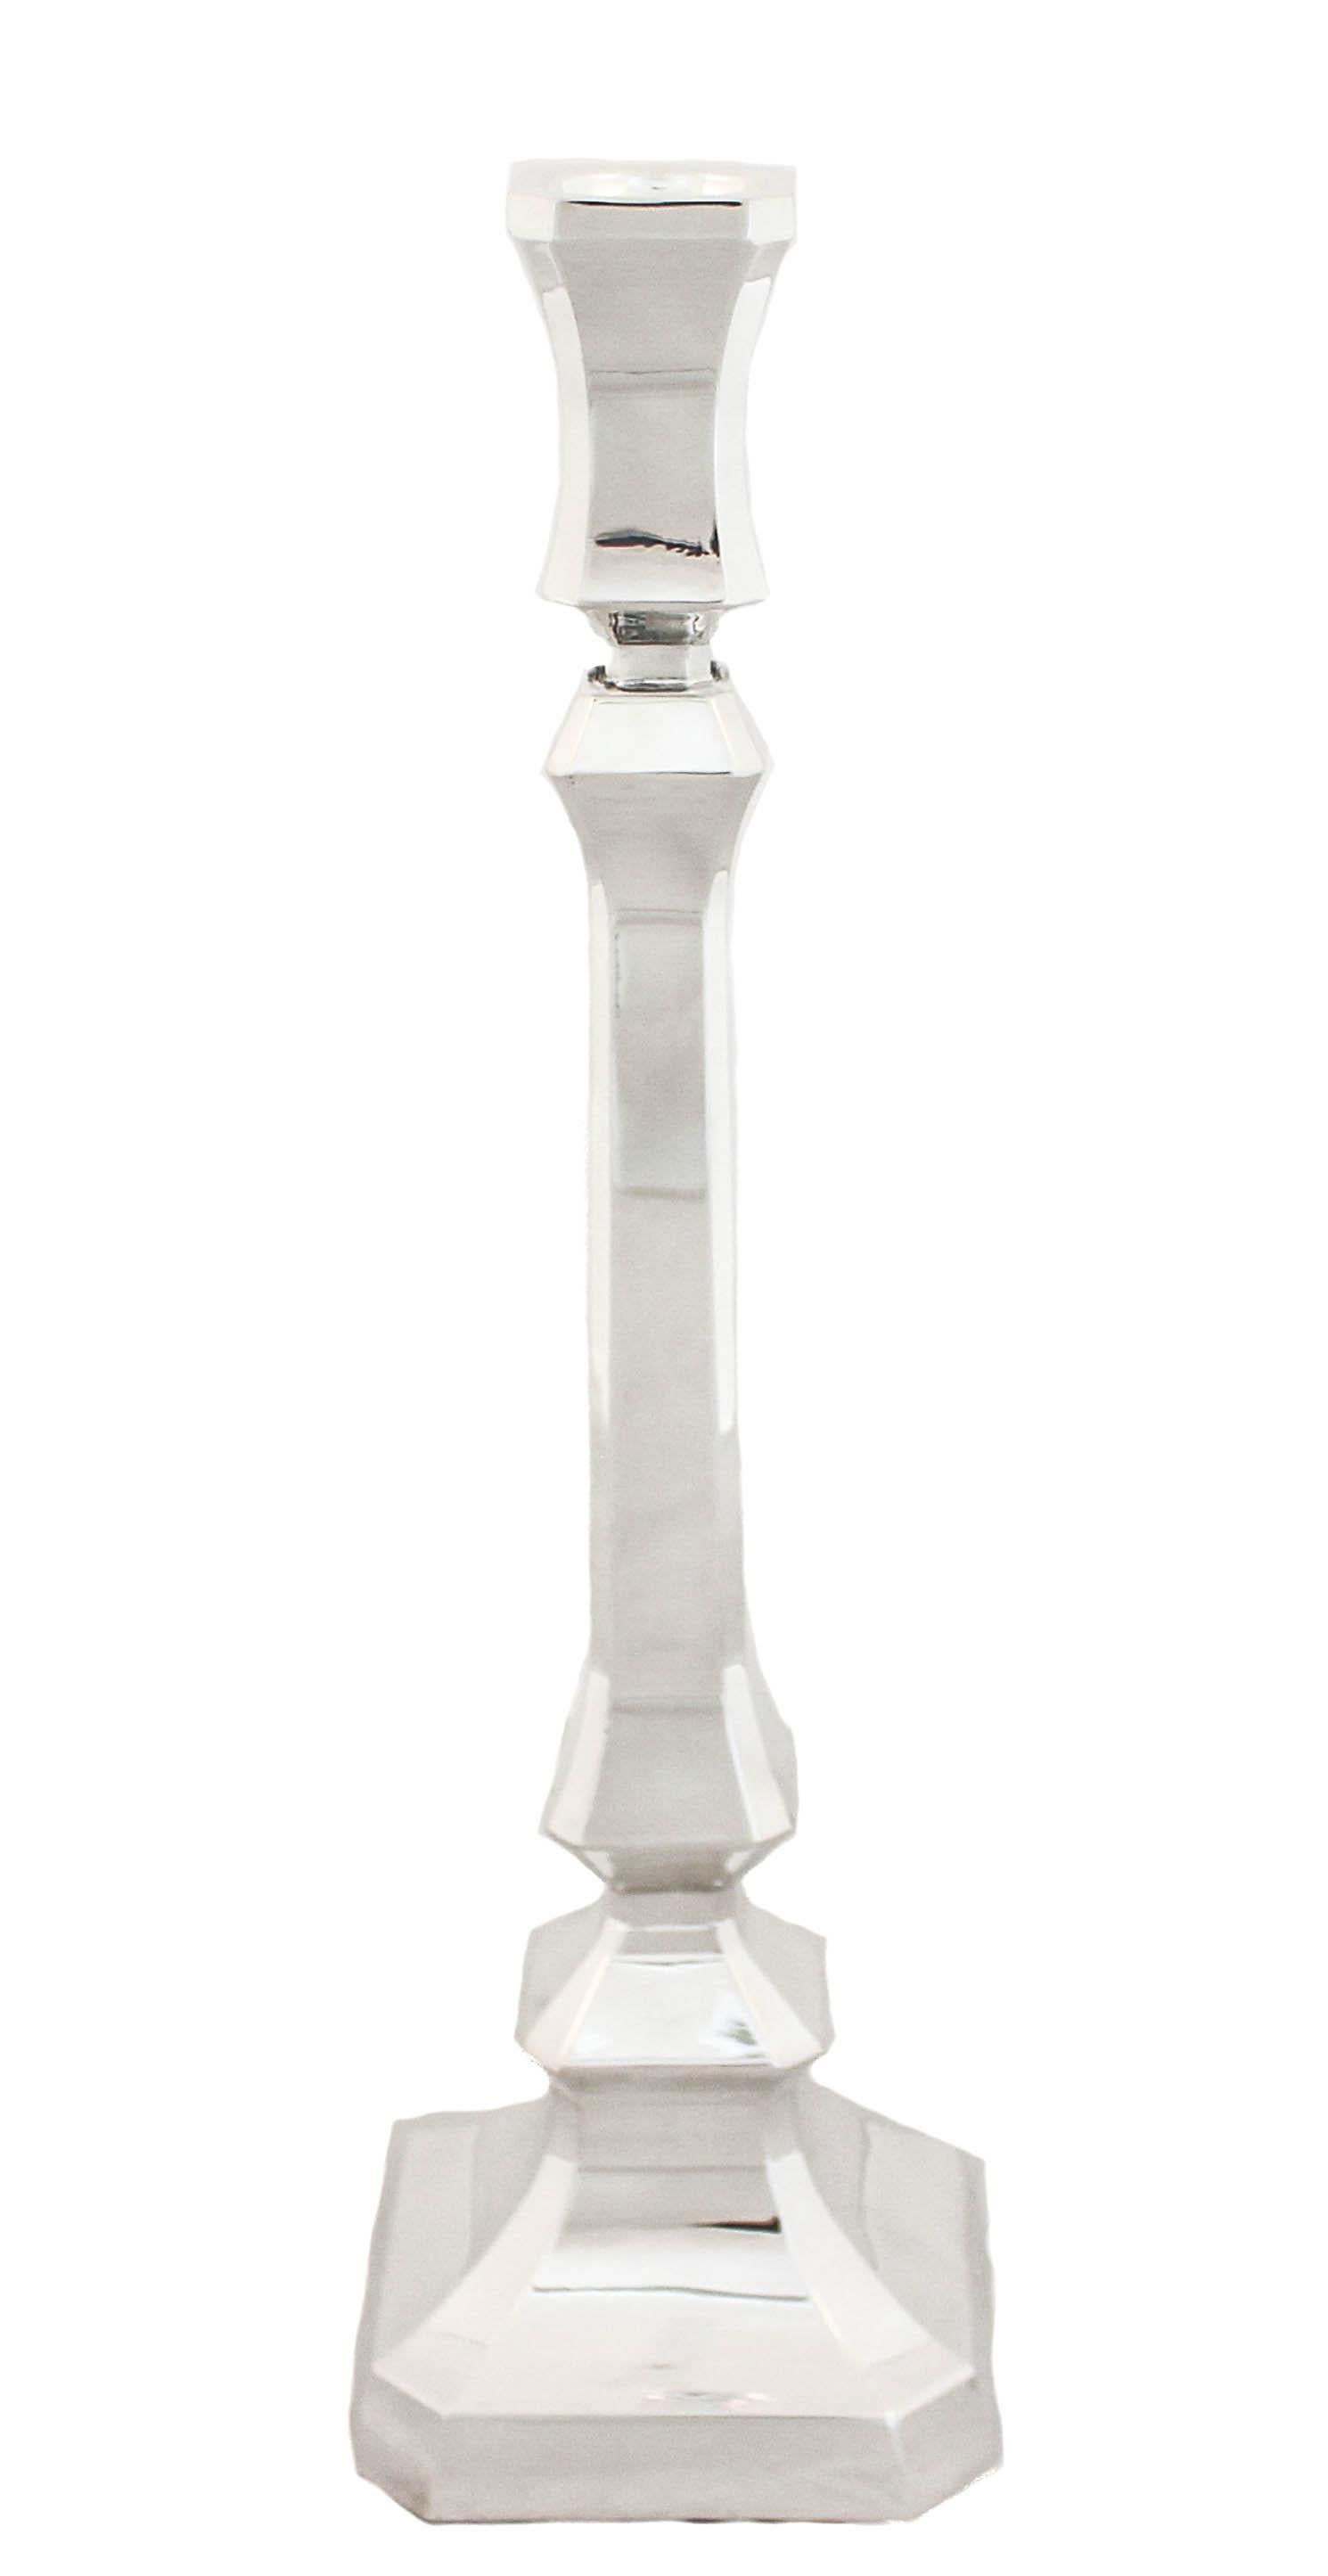 We are happy to offer you this pair of new sterling silver candlesticks.  They have a neoclassic style; straight lines and no decoration.  Sleek and modern and at the same time sophisticated and classic!!  These candlesticks are timeless and will